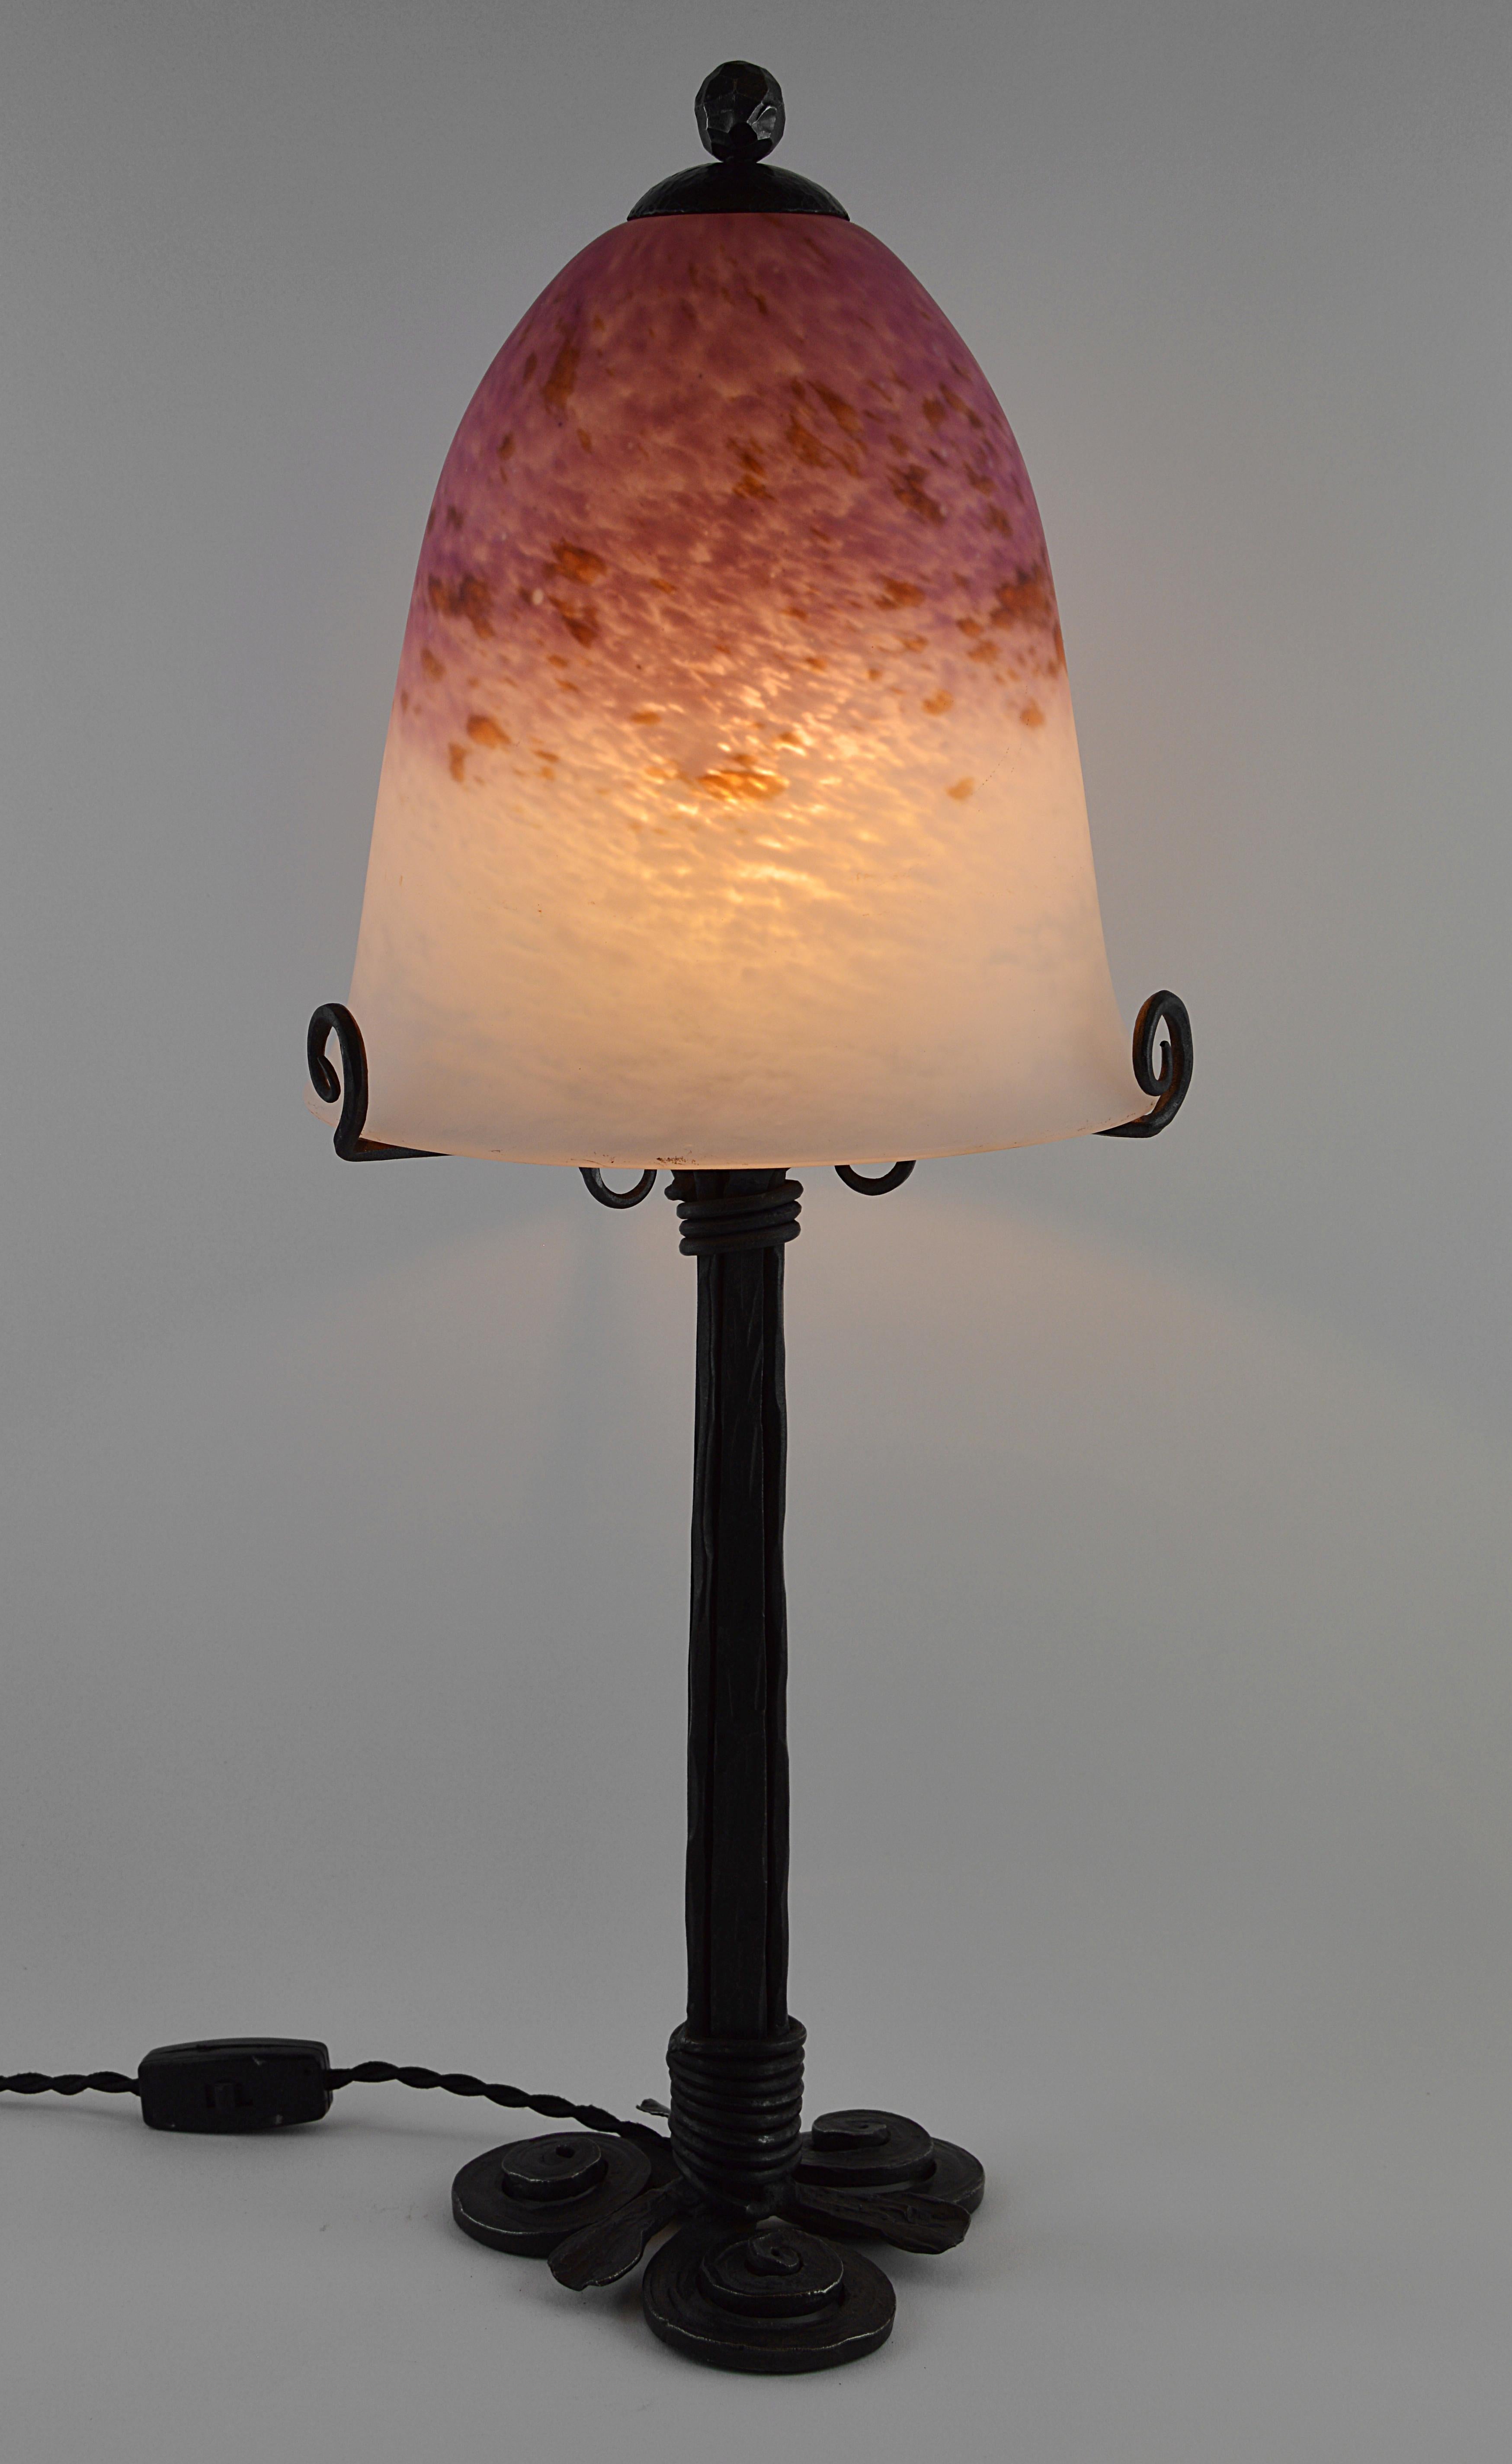 Large French Art Deco table lamp by Charles Schneider (Epinay-sur-Seine, Paris), France, 1928-1929. This blown molded glass shade made by Charles Schneider comes on its wrought iron base. The glass shade was made of blown double glass with powders